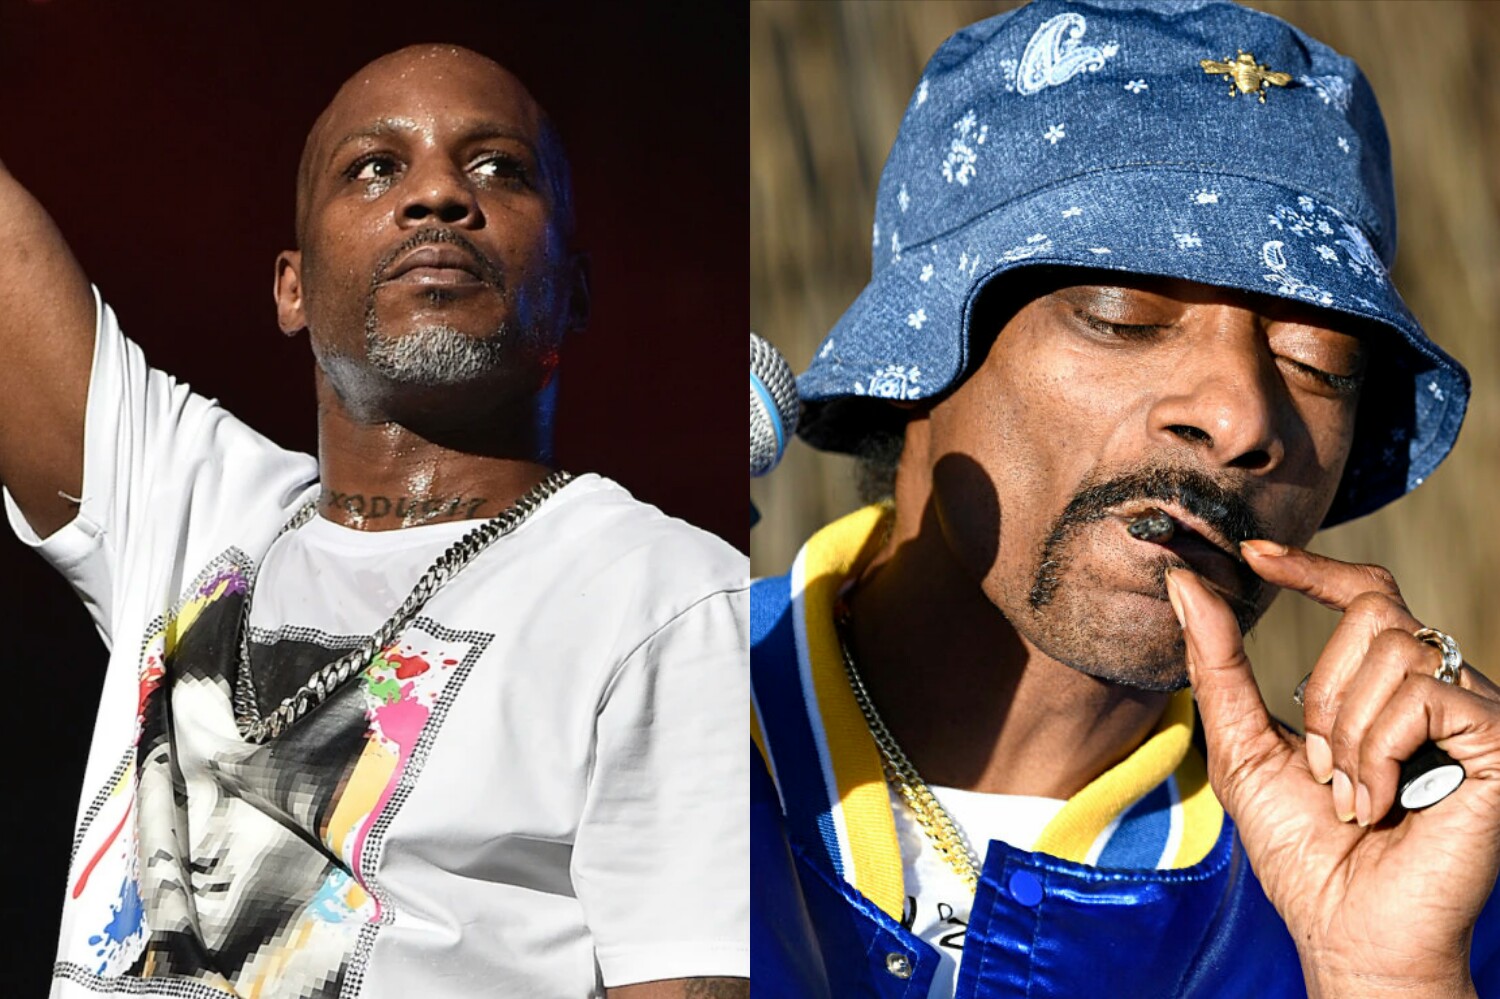 Instagram with Snoop Dogg and DMX